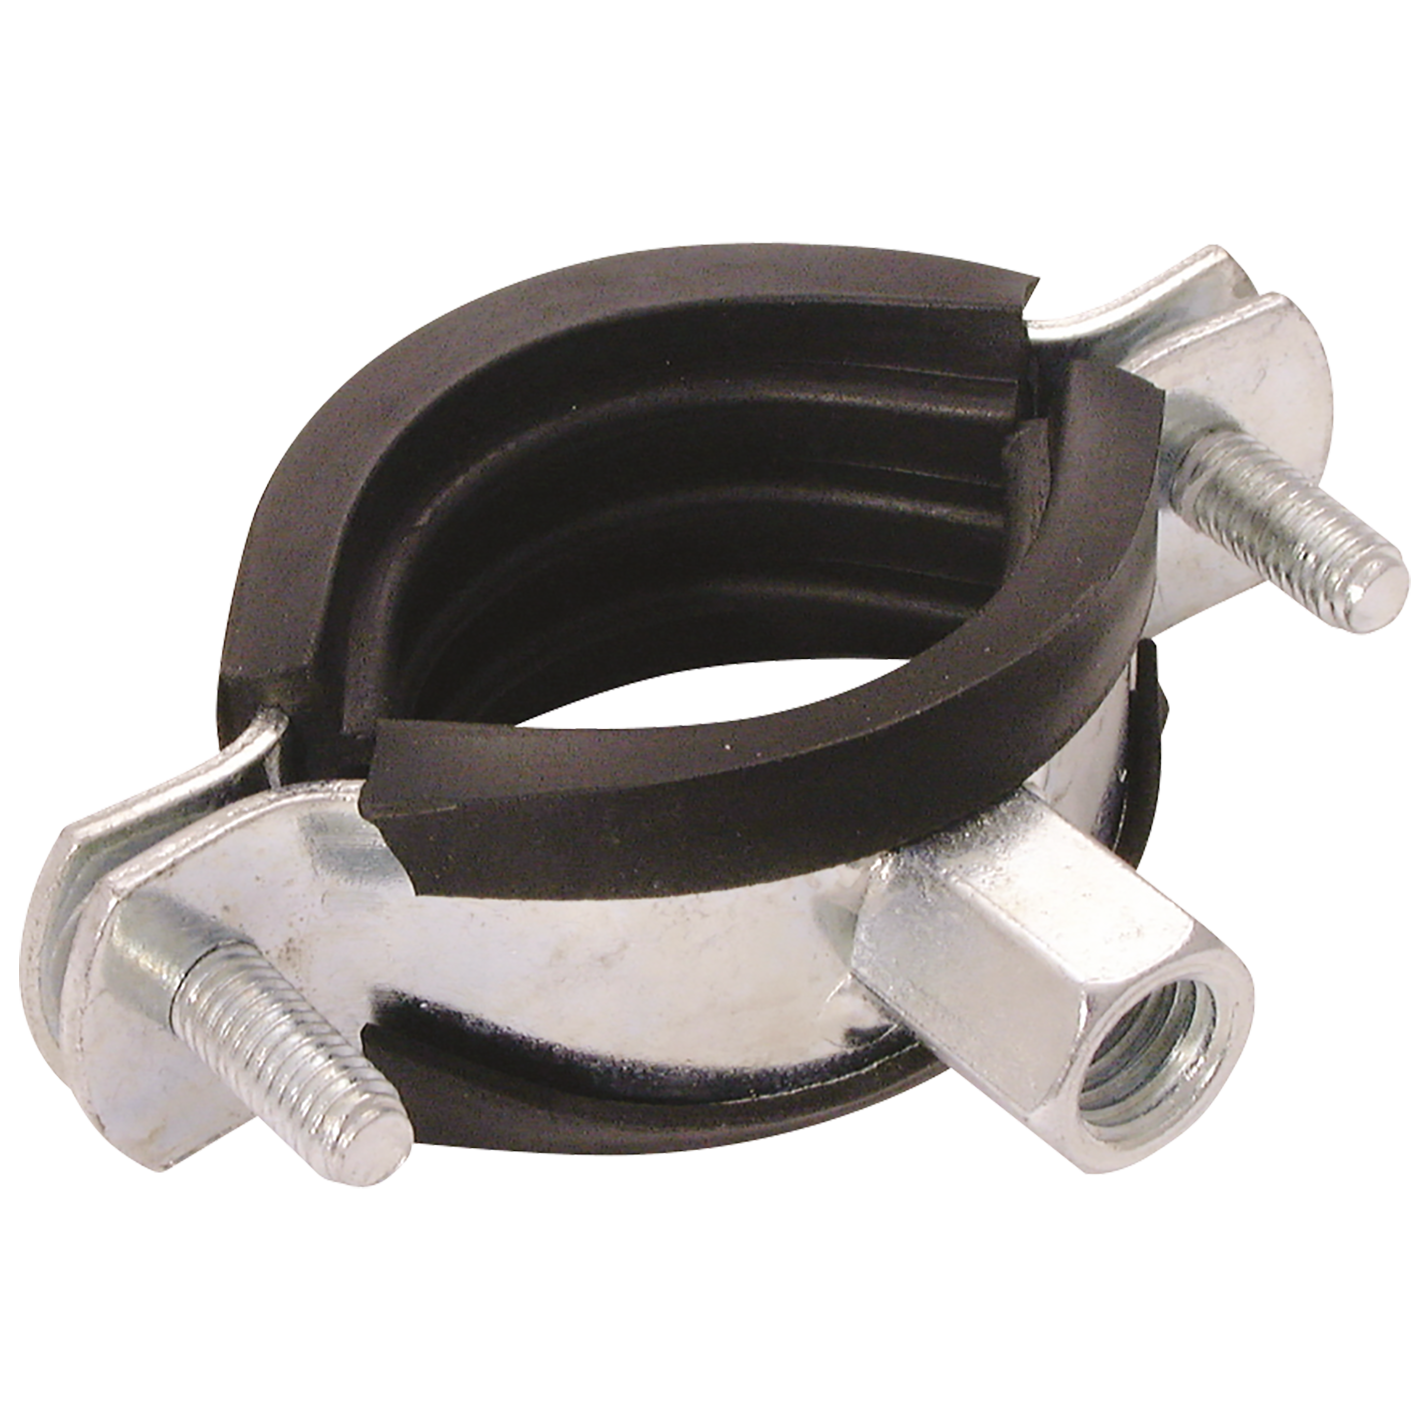 215-225MM EPDM INSULATED RUBBER LINED CLIPS M8/M10